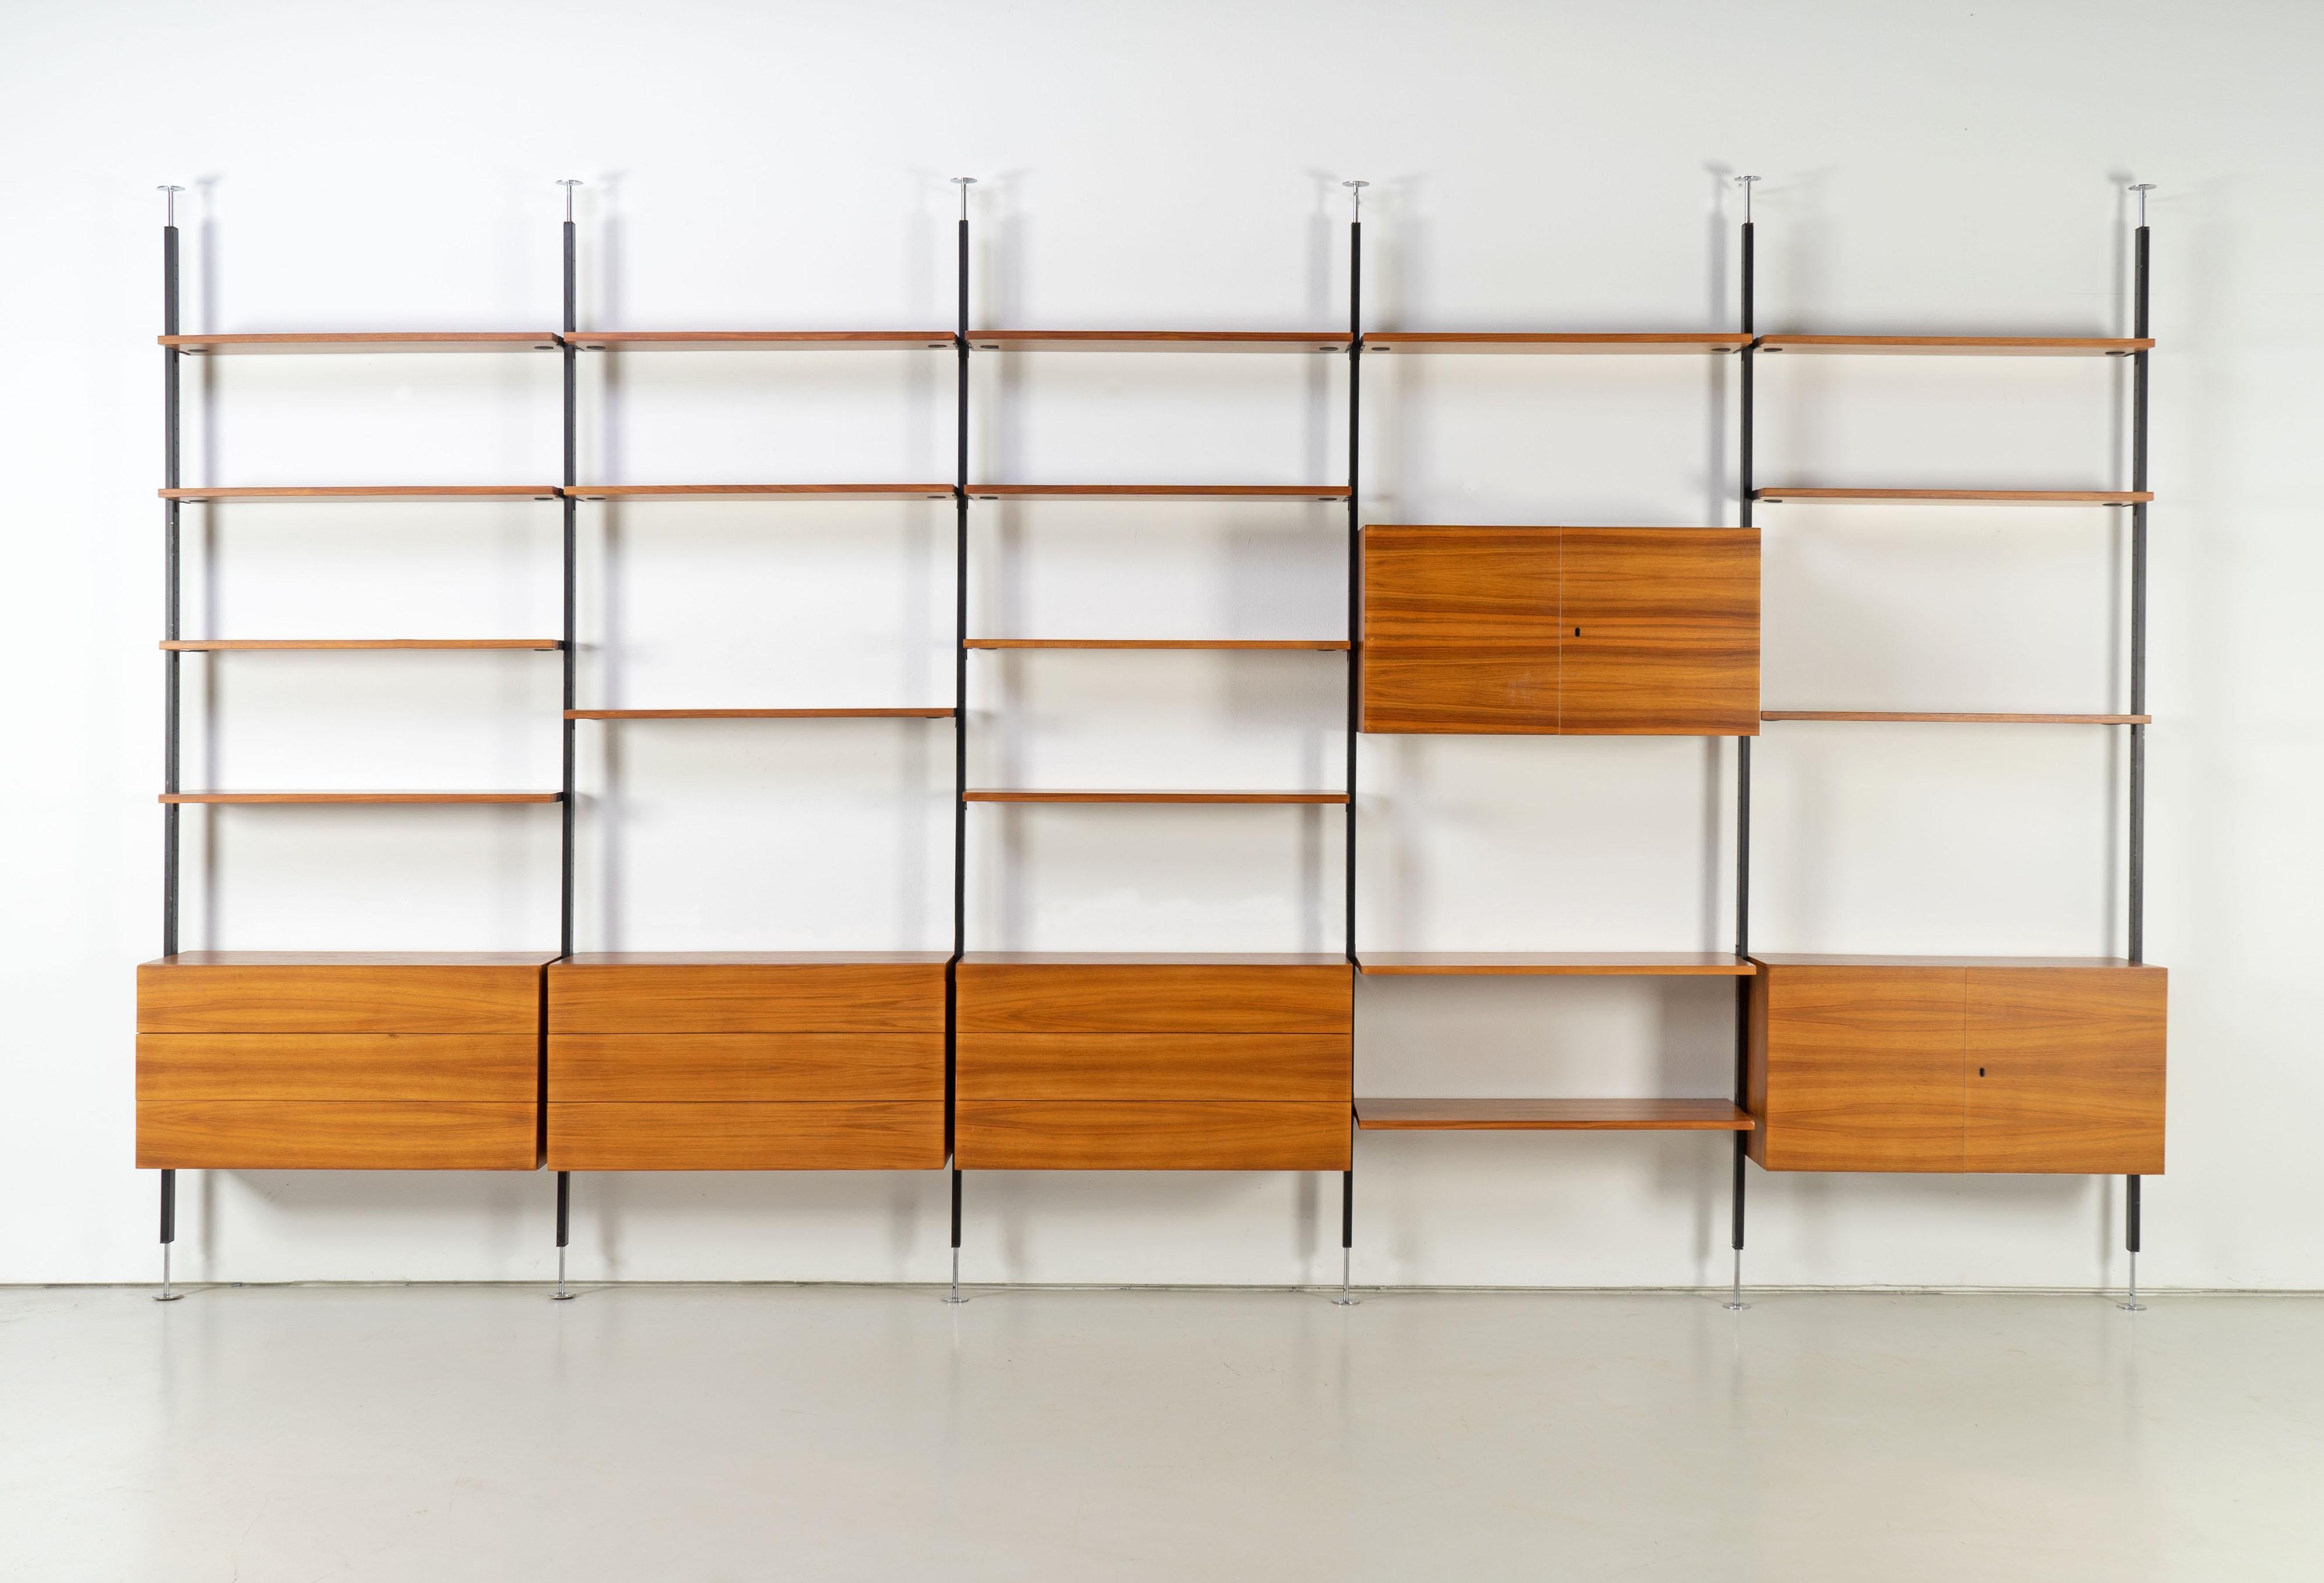 Rare free standing wall-unit designed by Ulrich P. Wieser for Bofinger - Wohnbedarf AG, Switzerland in 1958. Height adjustable and veneered with beautiful walnut (also backside).